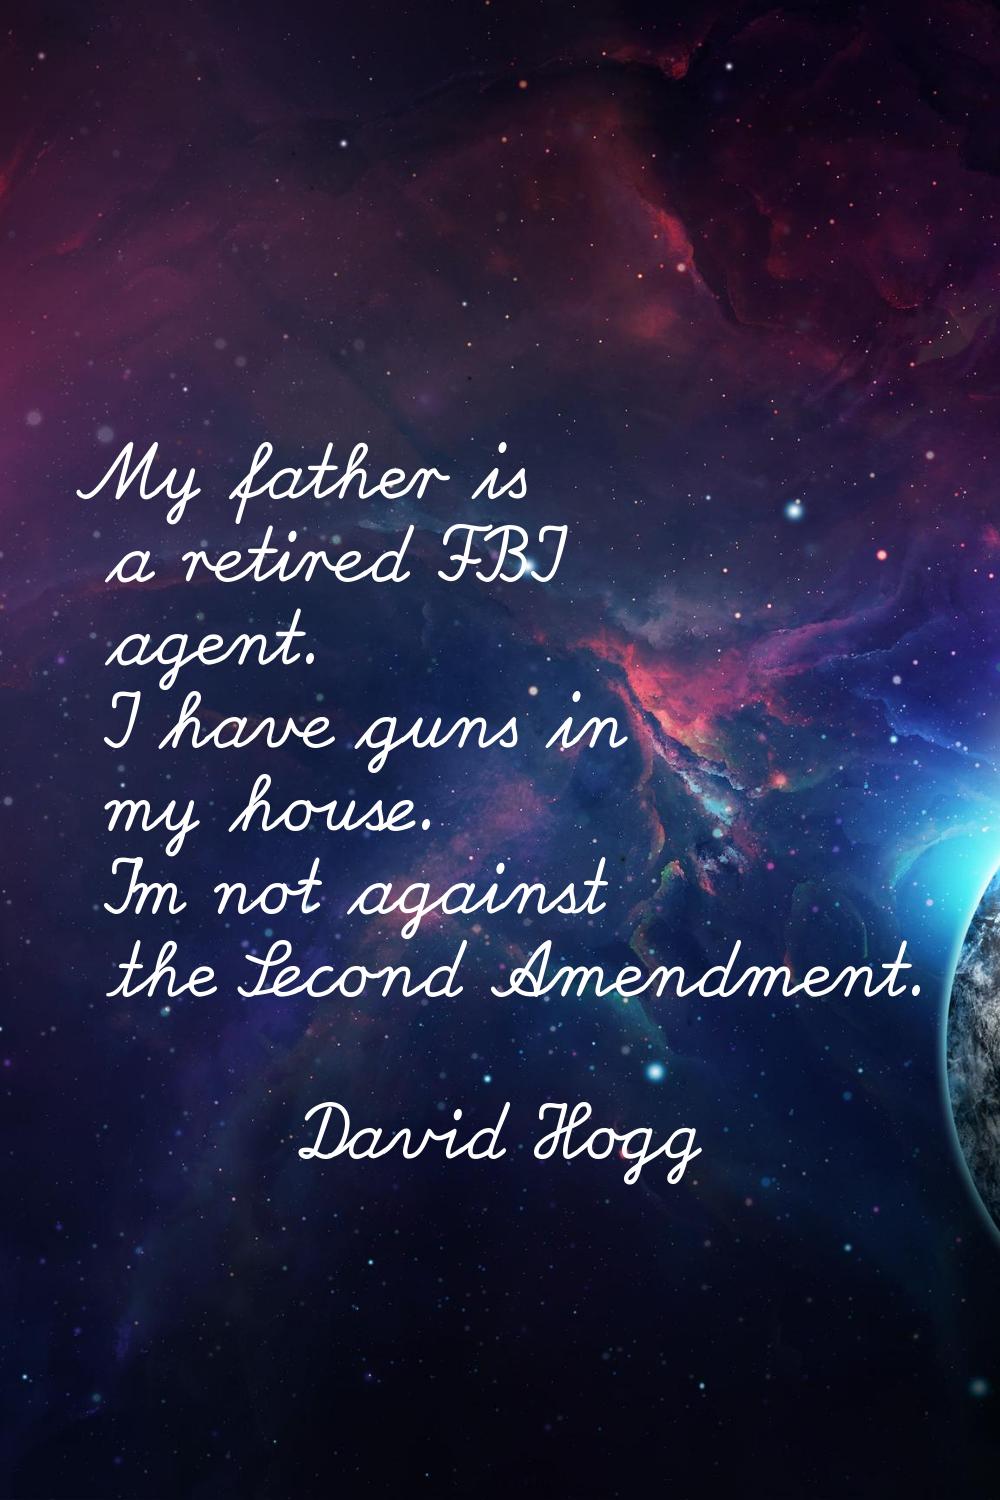 My father is a retired FBI agent. I have guns in my house. I'm not against the Second Amendment.